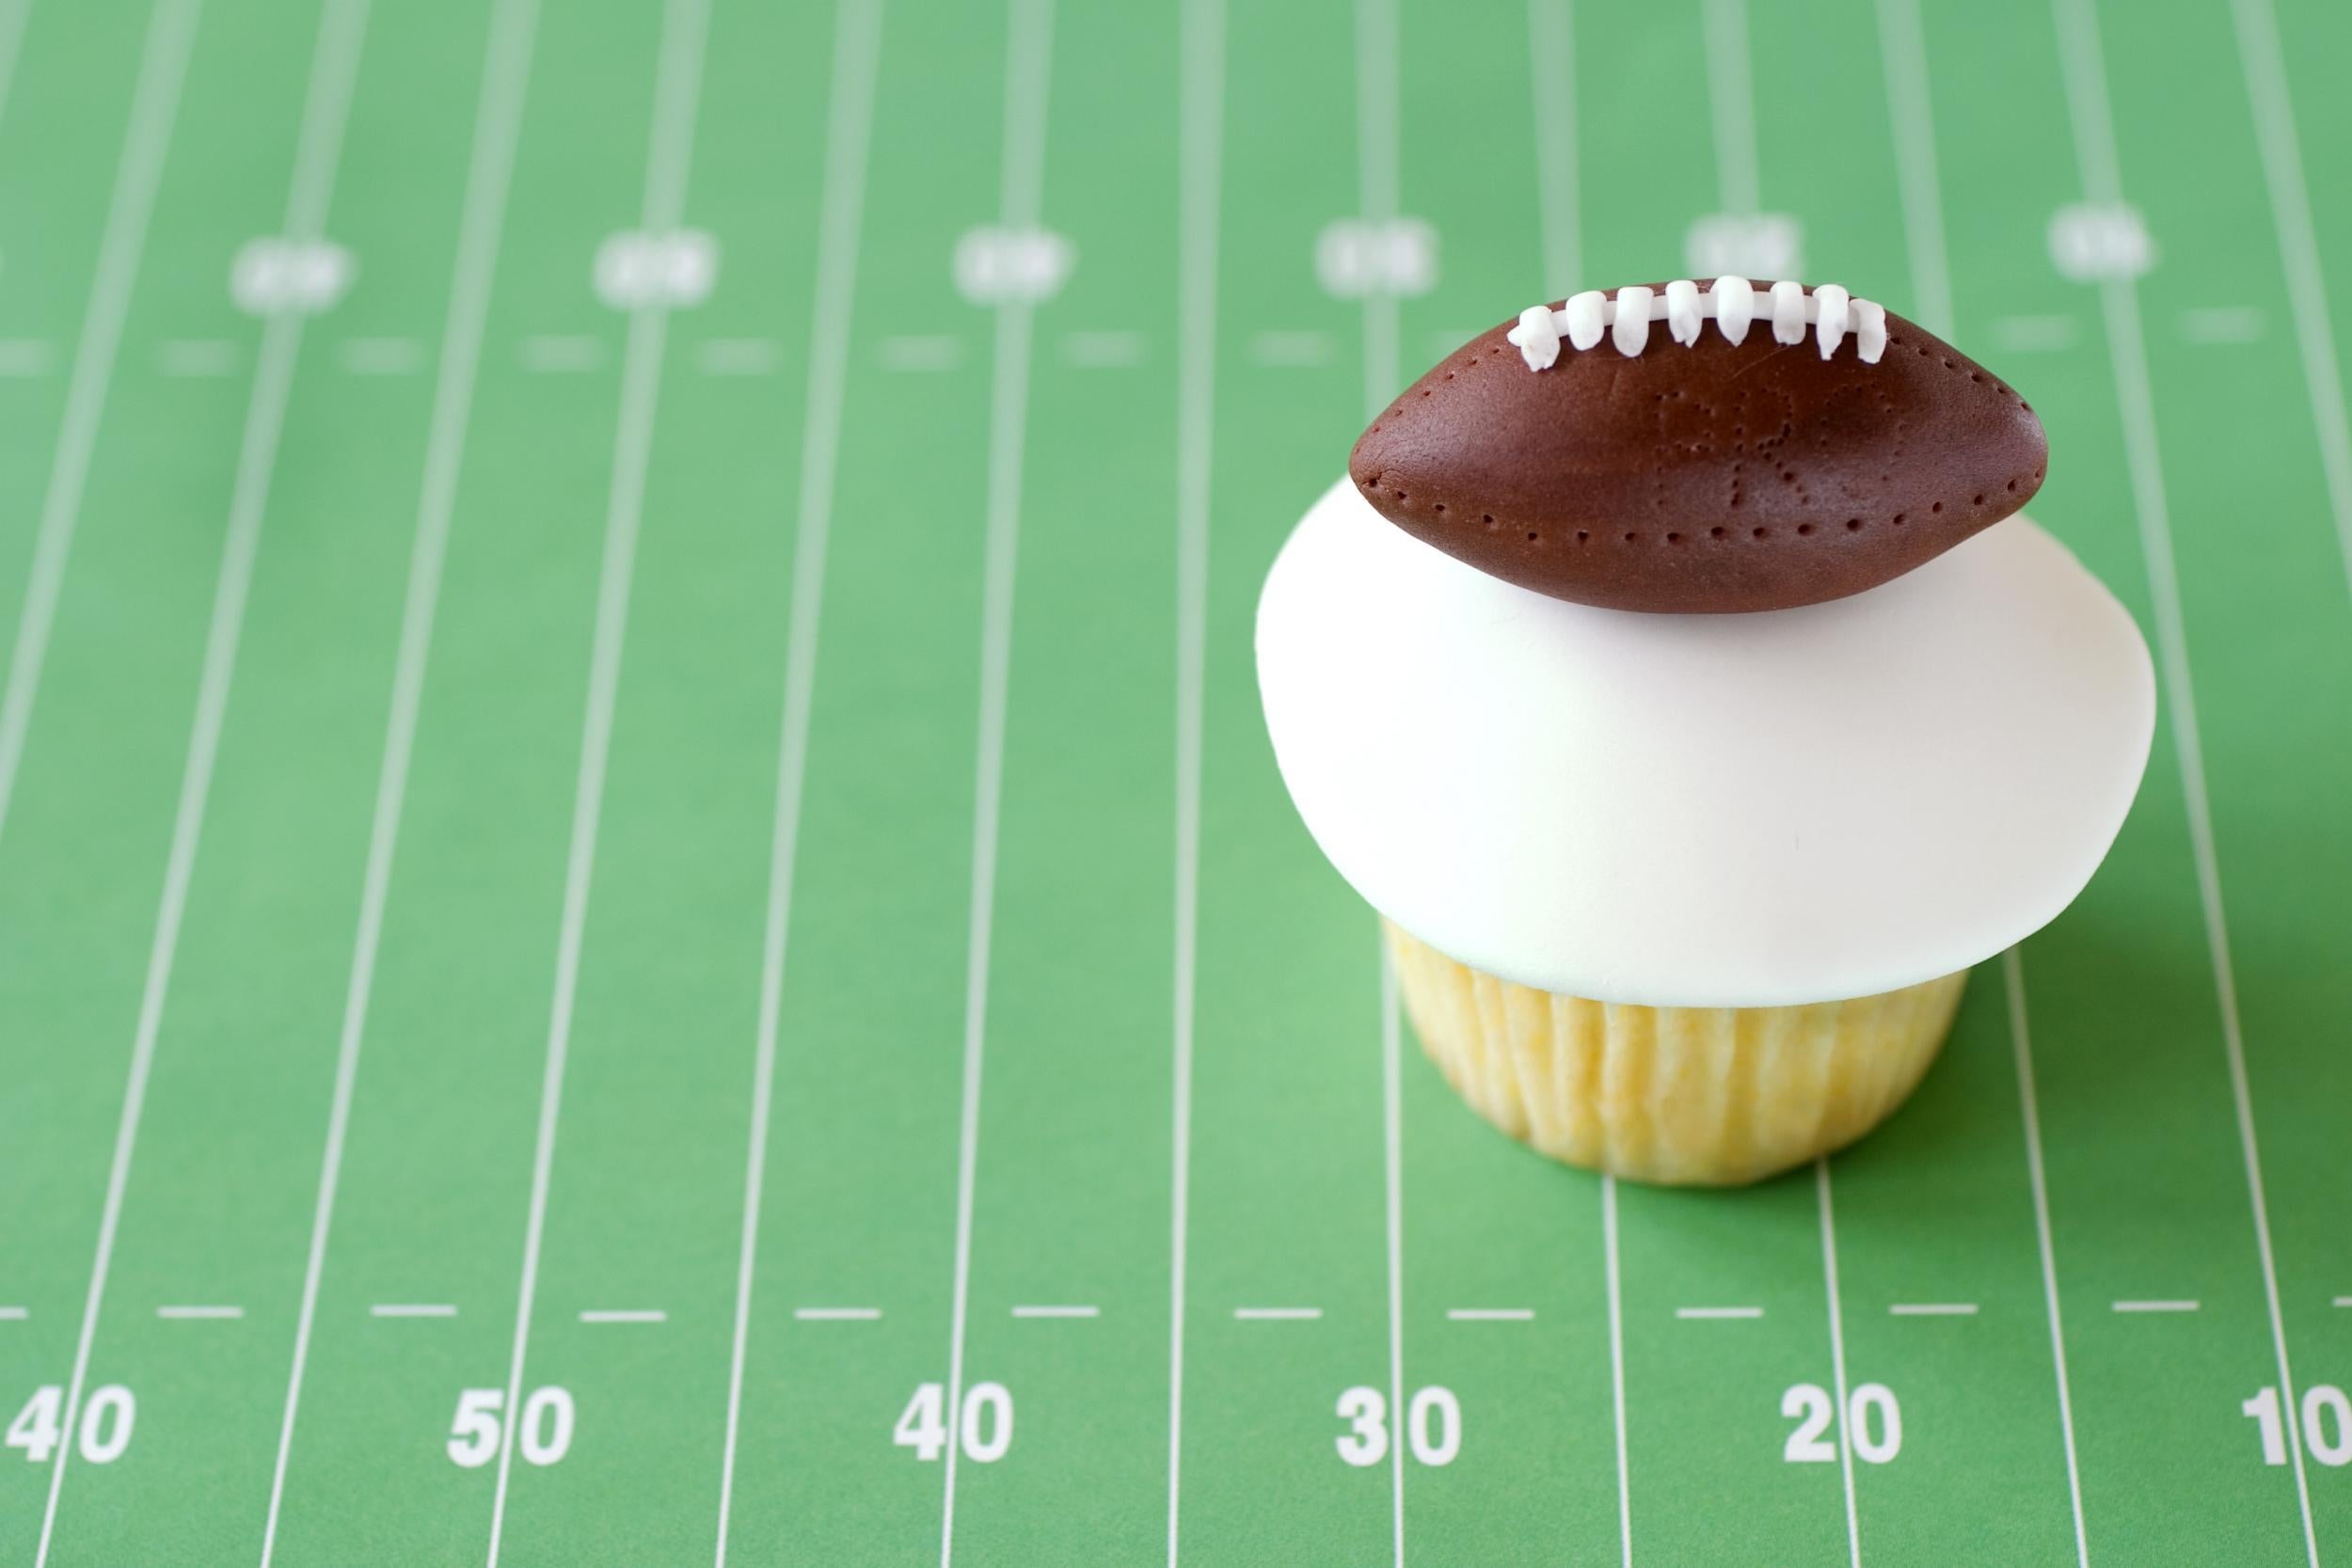 Cupcakes decorated with footballs are perfect for dessert on Super Bowl Sunday